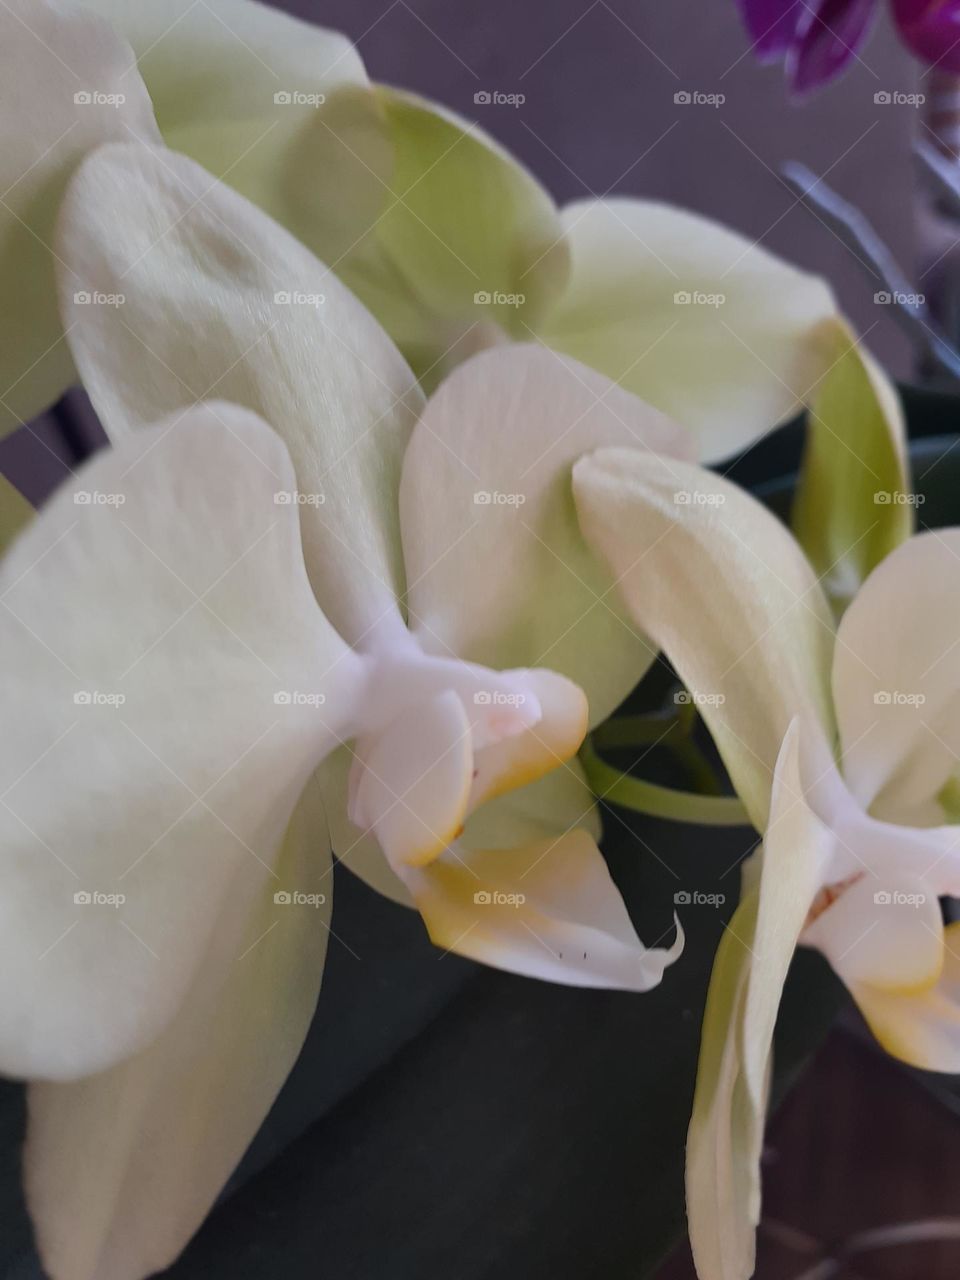 My orchids.